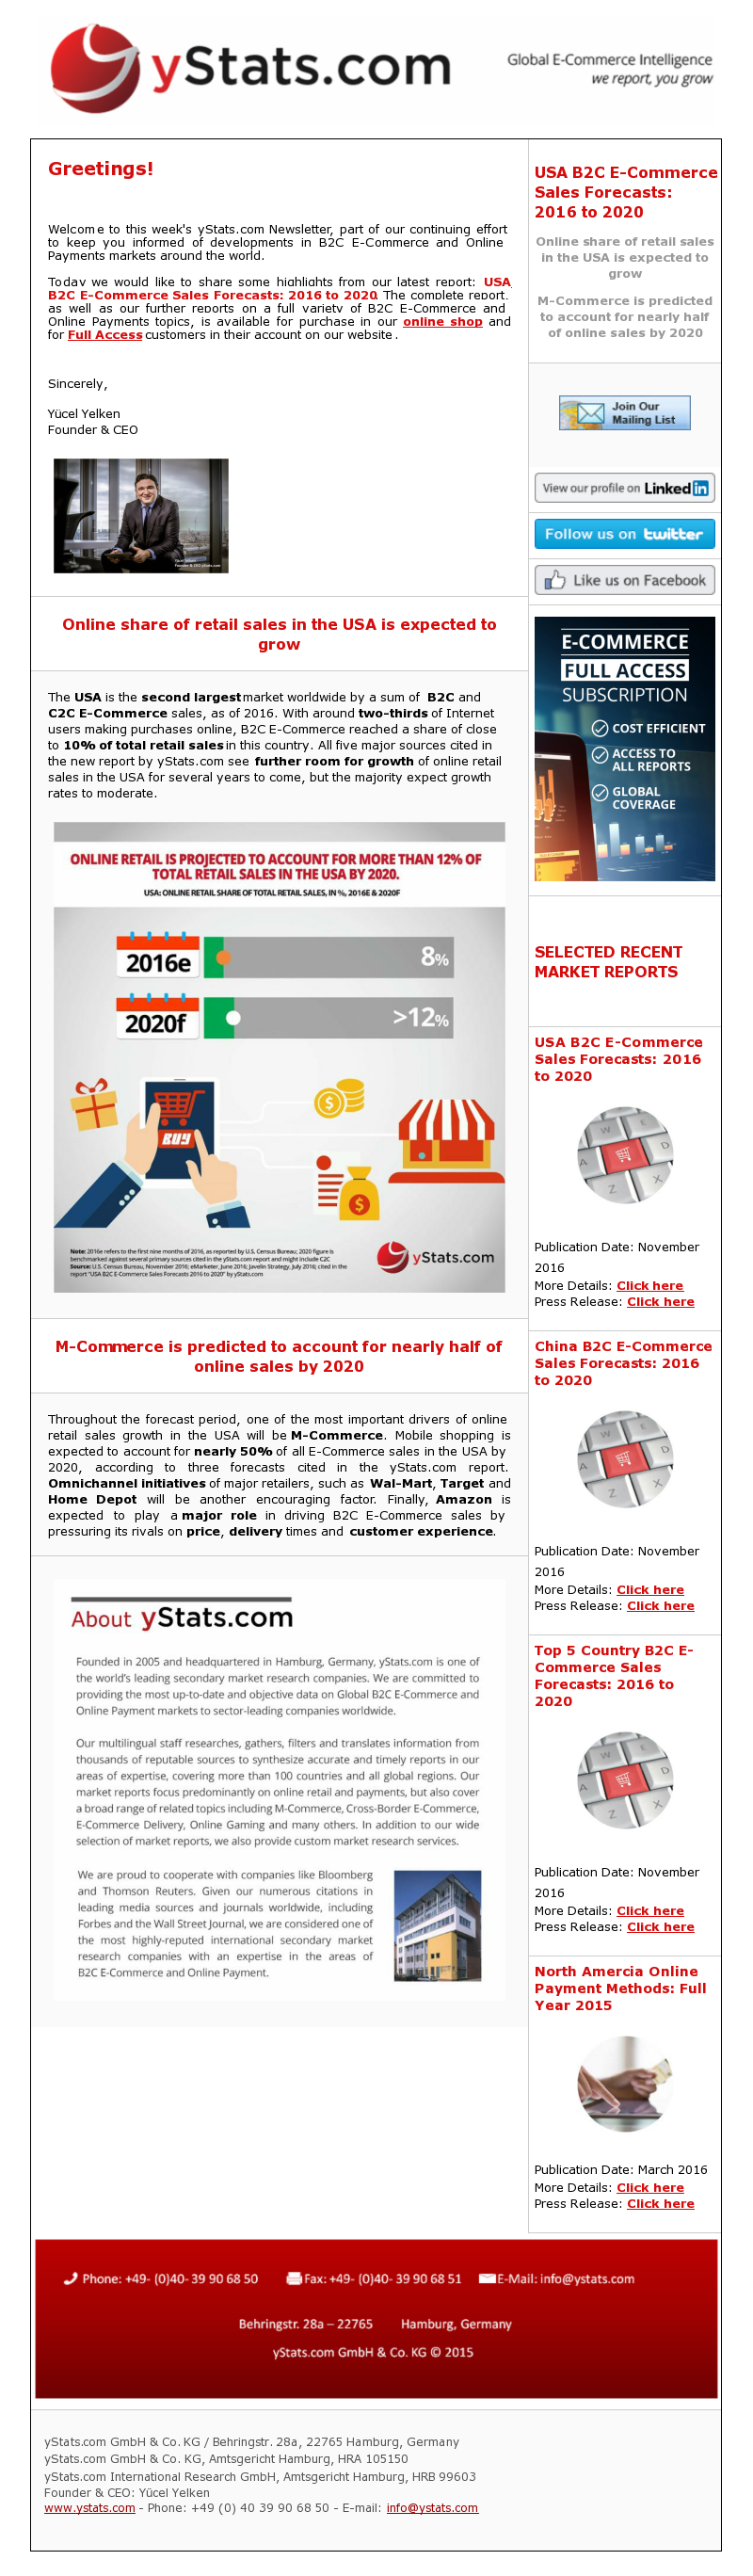 New report from yStats.com synthesizes online retail sales forecasts in the USA

The USA is the second largest market worldwide by a sum of B2C and C2C E-Commerce sales, as of 2016. With around two-thirds of Internet users making purchases online, B2C E-Commerce reached a share of close to 10% of total retail sales in this country. All five major sources cited in the new report by yStats.com see further room for growth of online retail sales in the USA for several years to come, but the majority expect growth rates to moderate.

Throughout the forecast period, one of the most important drivers of online retail sales growth in the USA will be M-Commerce. Mobile shopping is expected to account for nearly 50% of all E-Commerce sales in the USA by 2020, according to three forecasts cited in the yStats.com report. Omnichannel initiatives of major retailers, such as Wal-Mart, Target and Home Depot will be another encouraging factor. Finally, Amazon is expected to play a major role in driving B2C E-Commerce sales by pressuring its rivals on price, delivery times and customer experience.